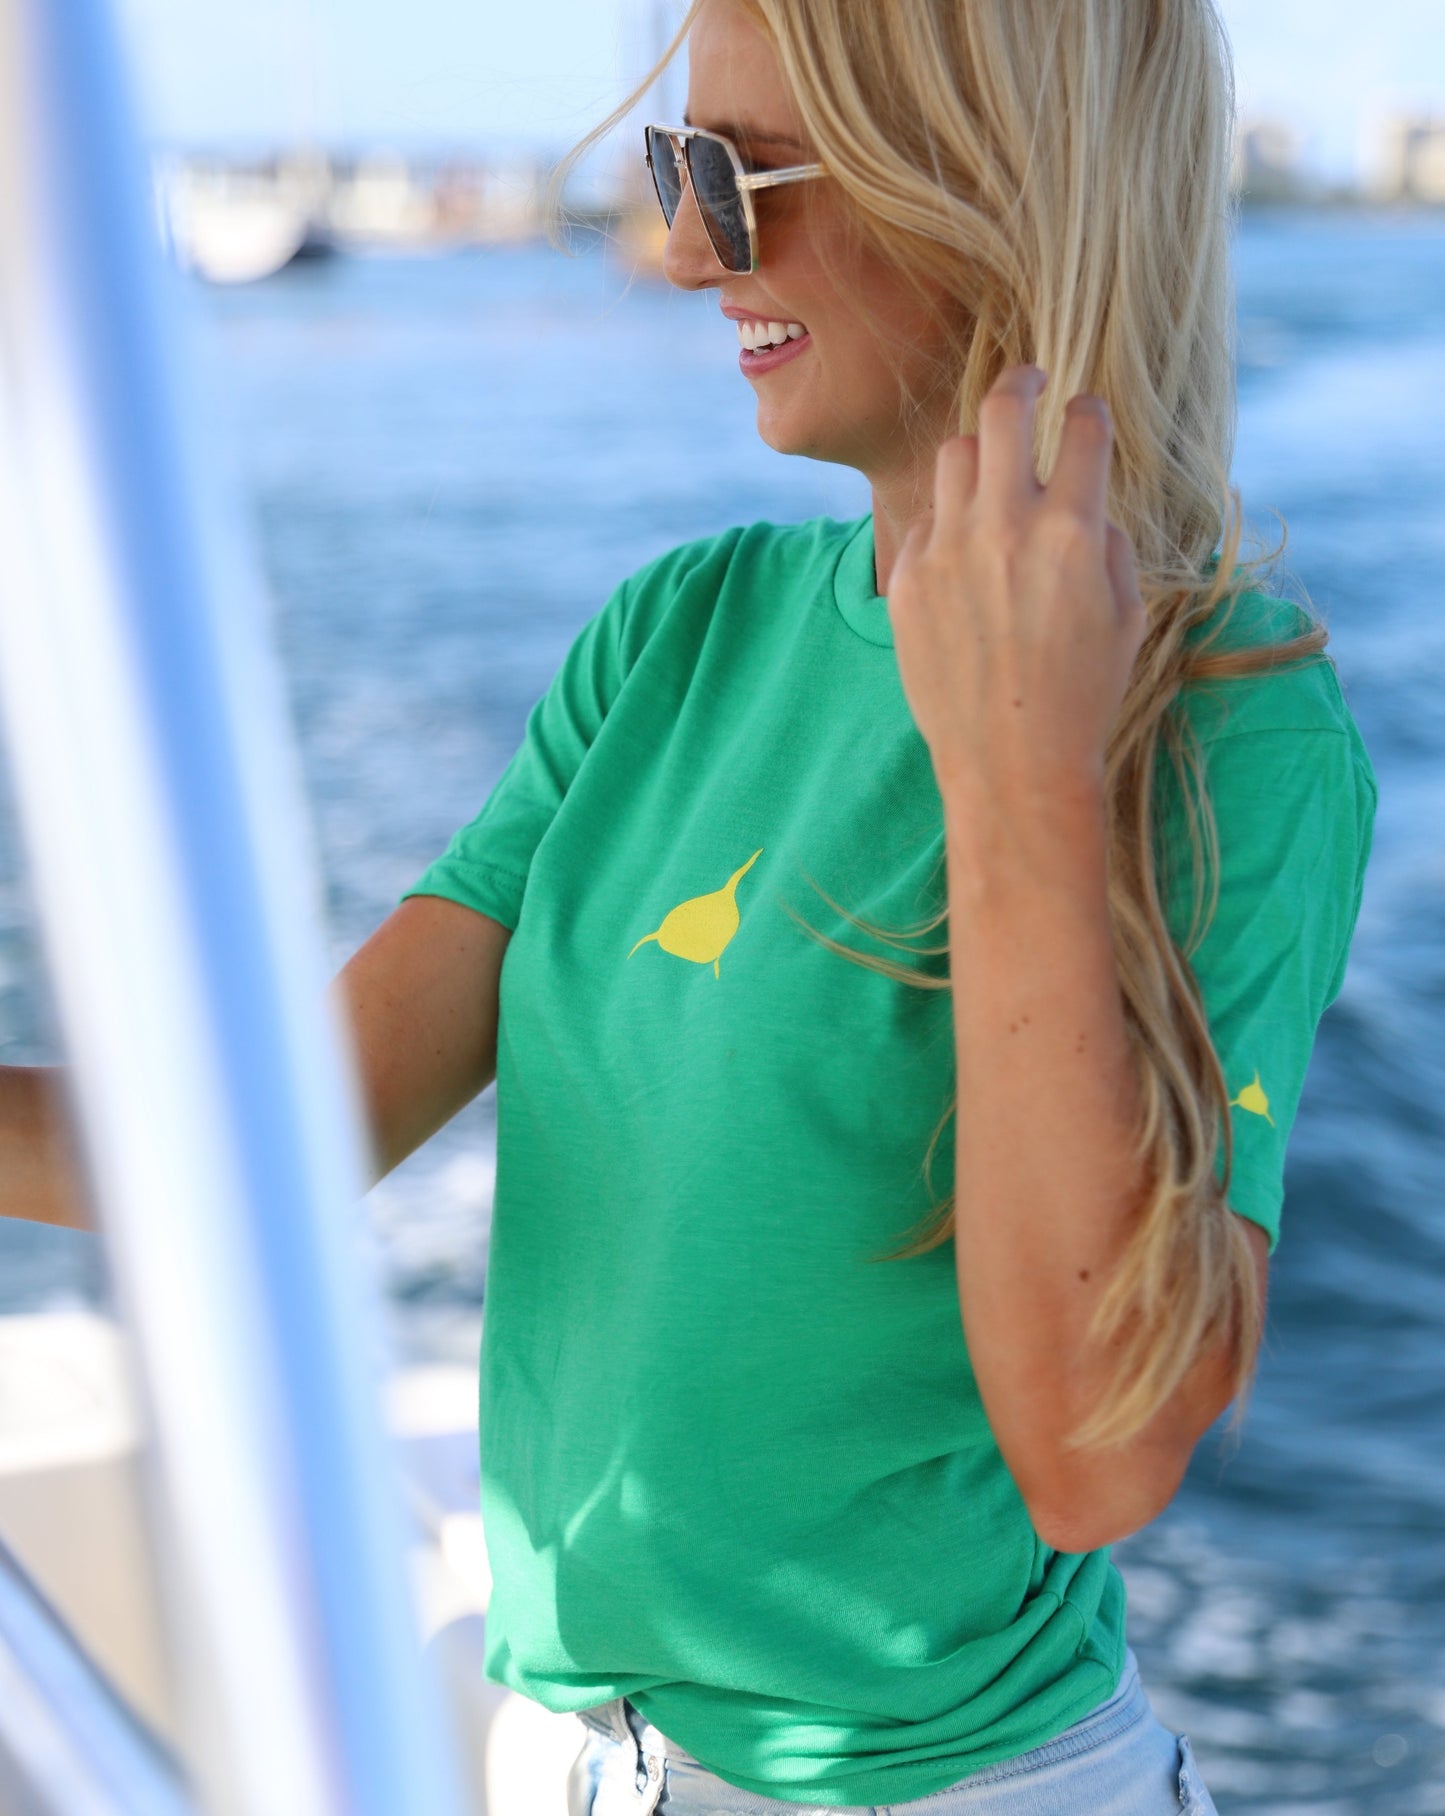 Neptunic Classic in Green and Yellow